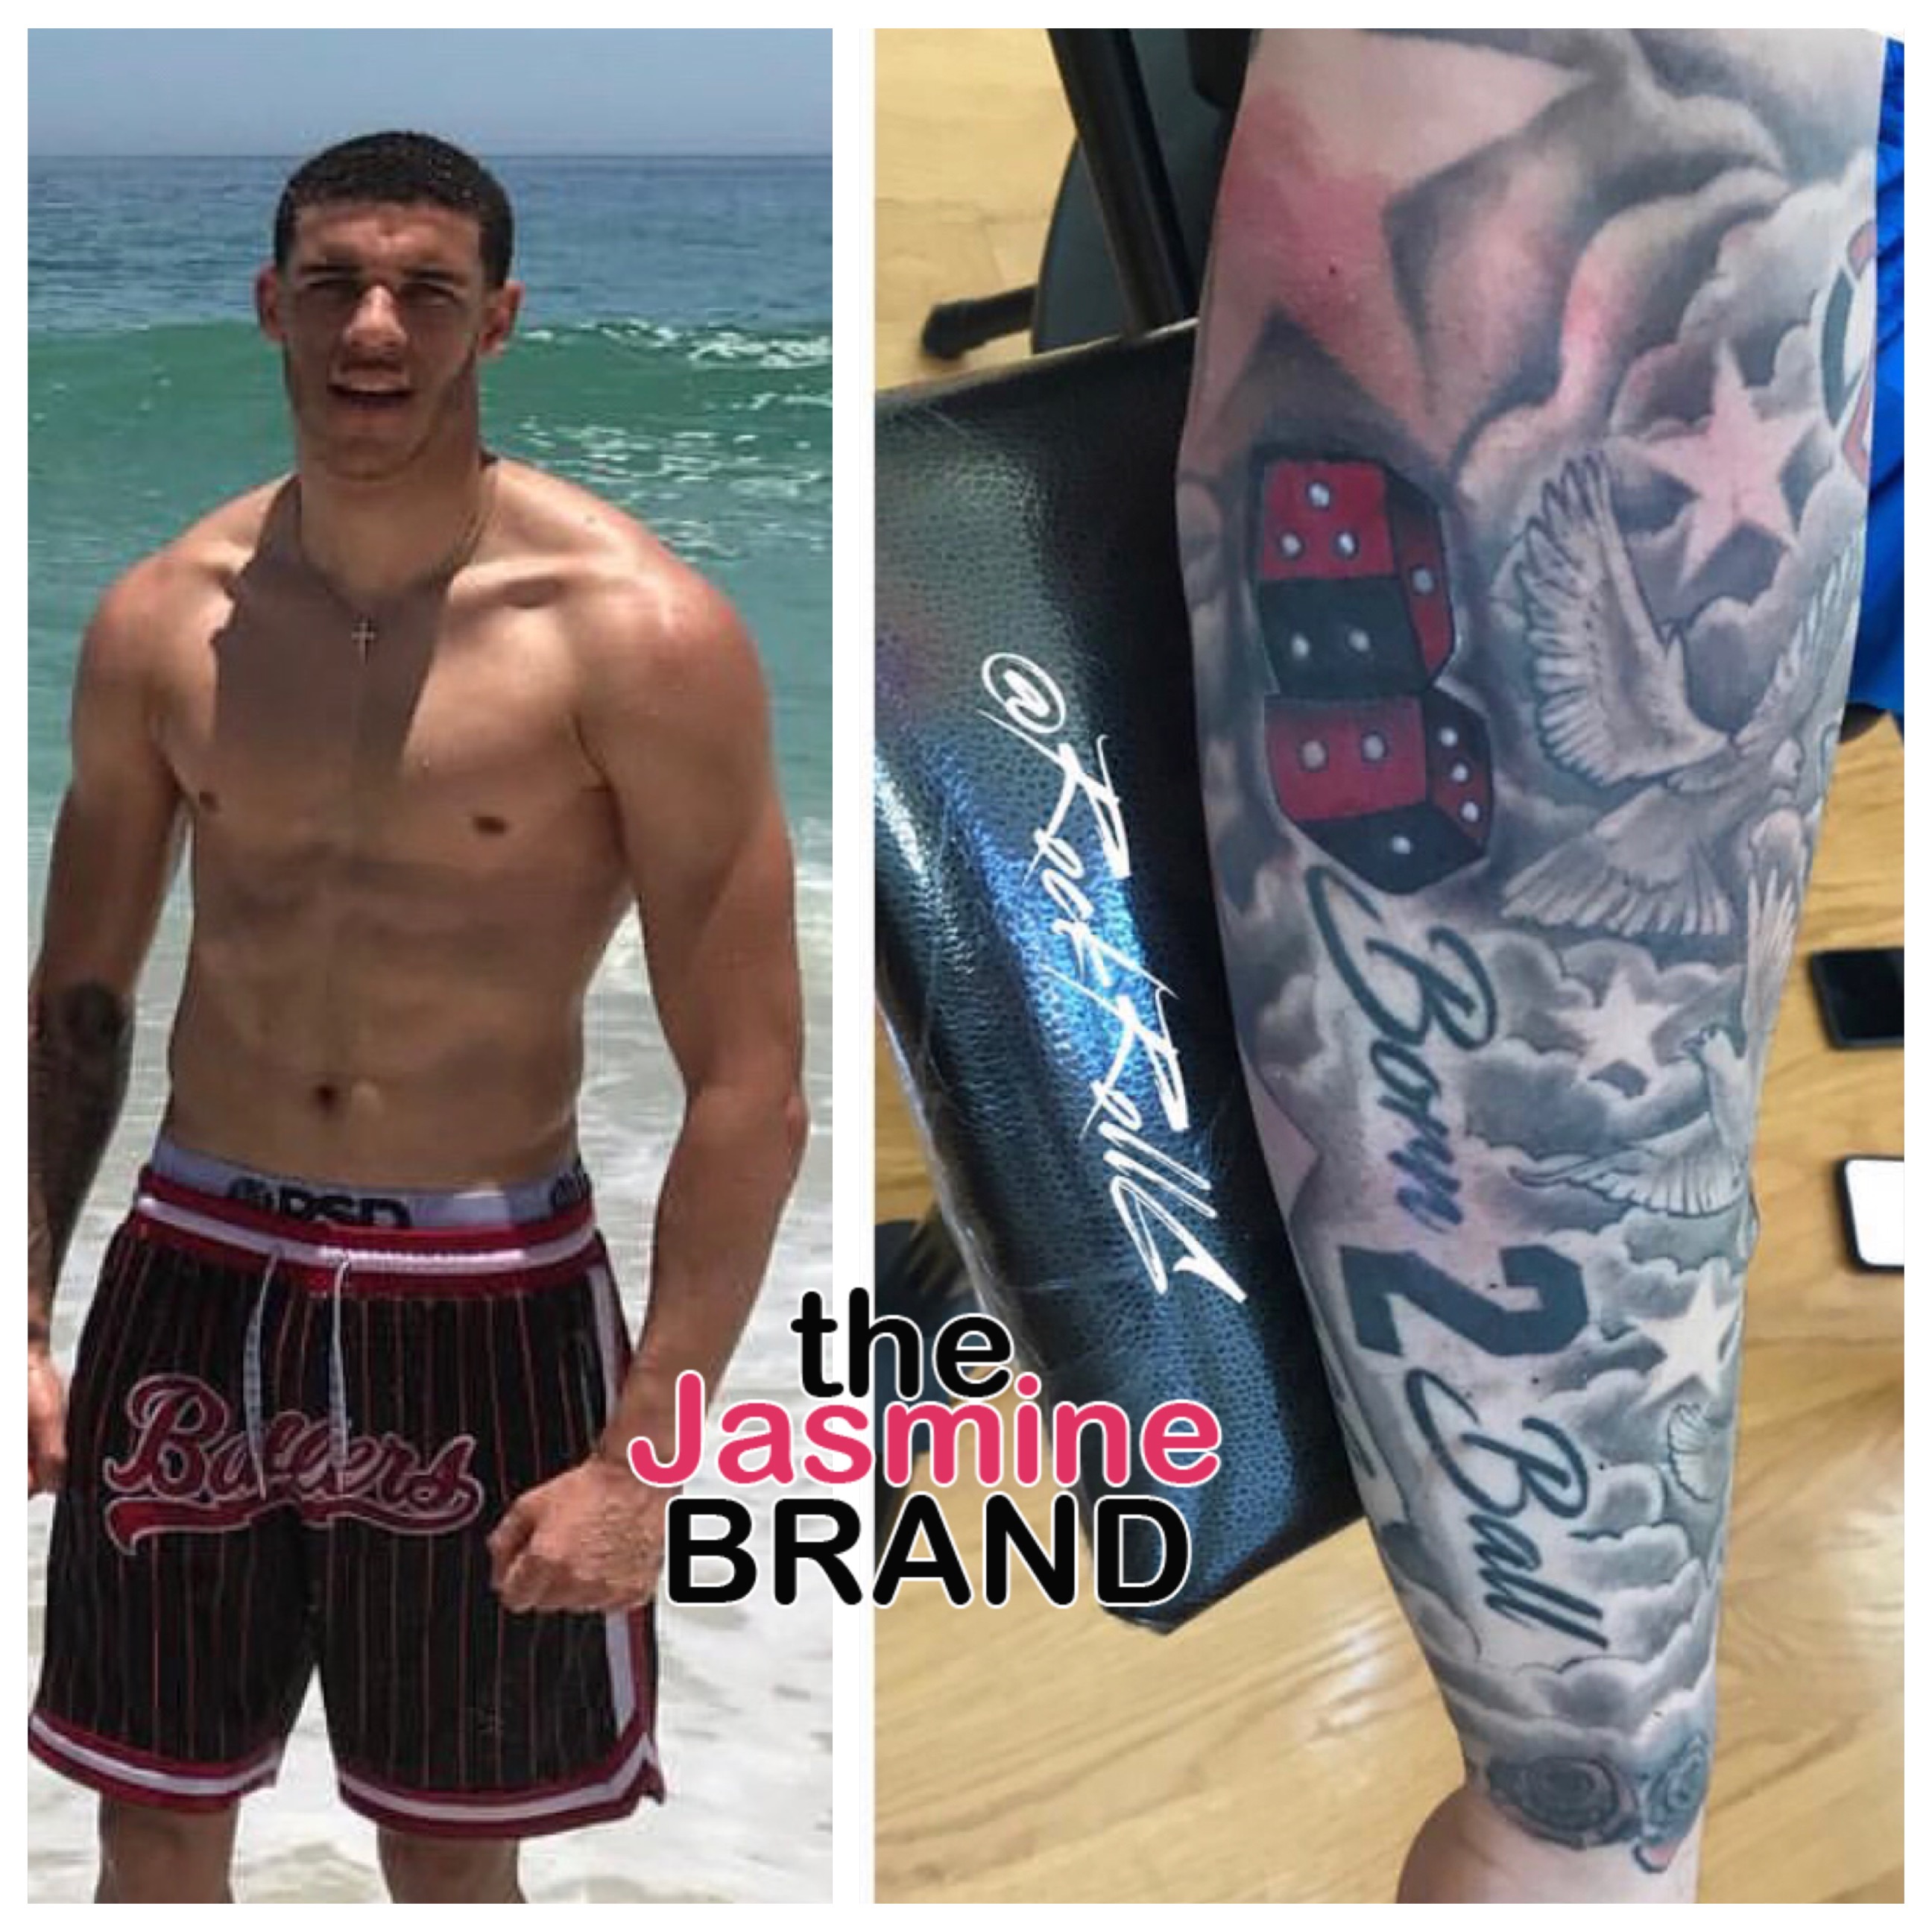 lonzo bbb thejasminebrand amidst baller pelicans tatted insanely